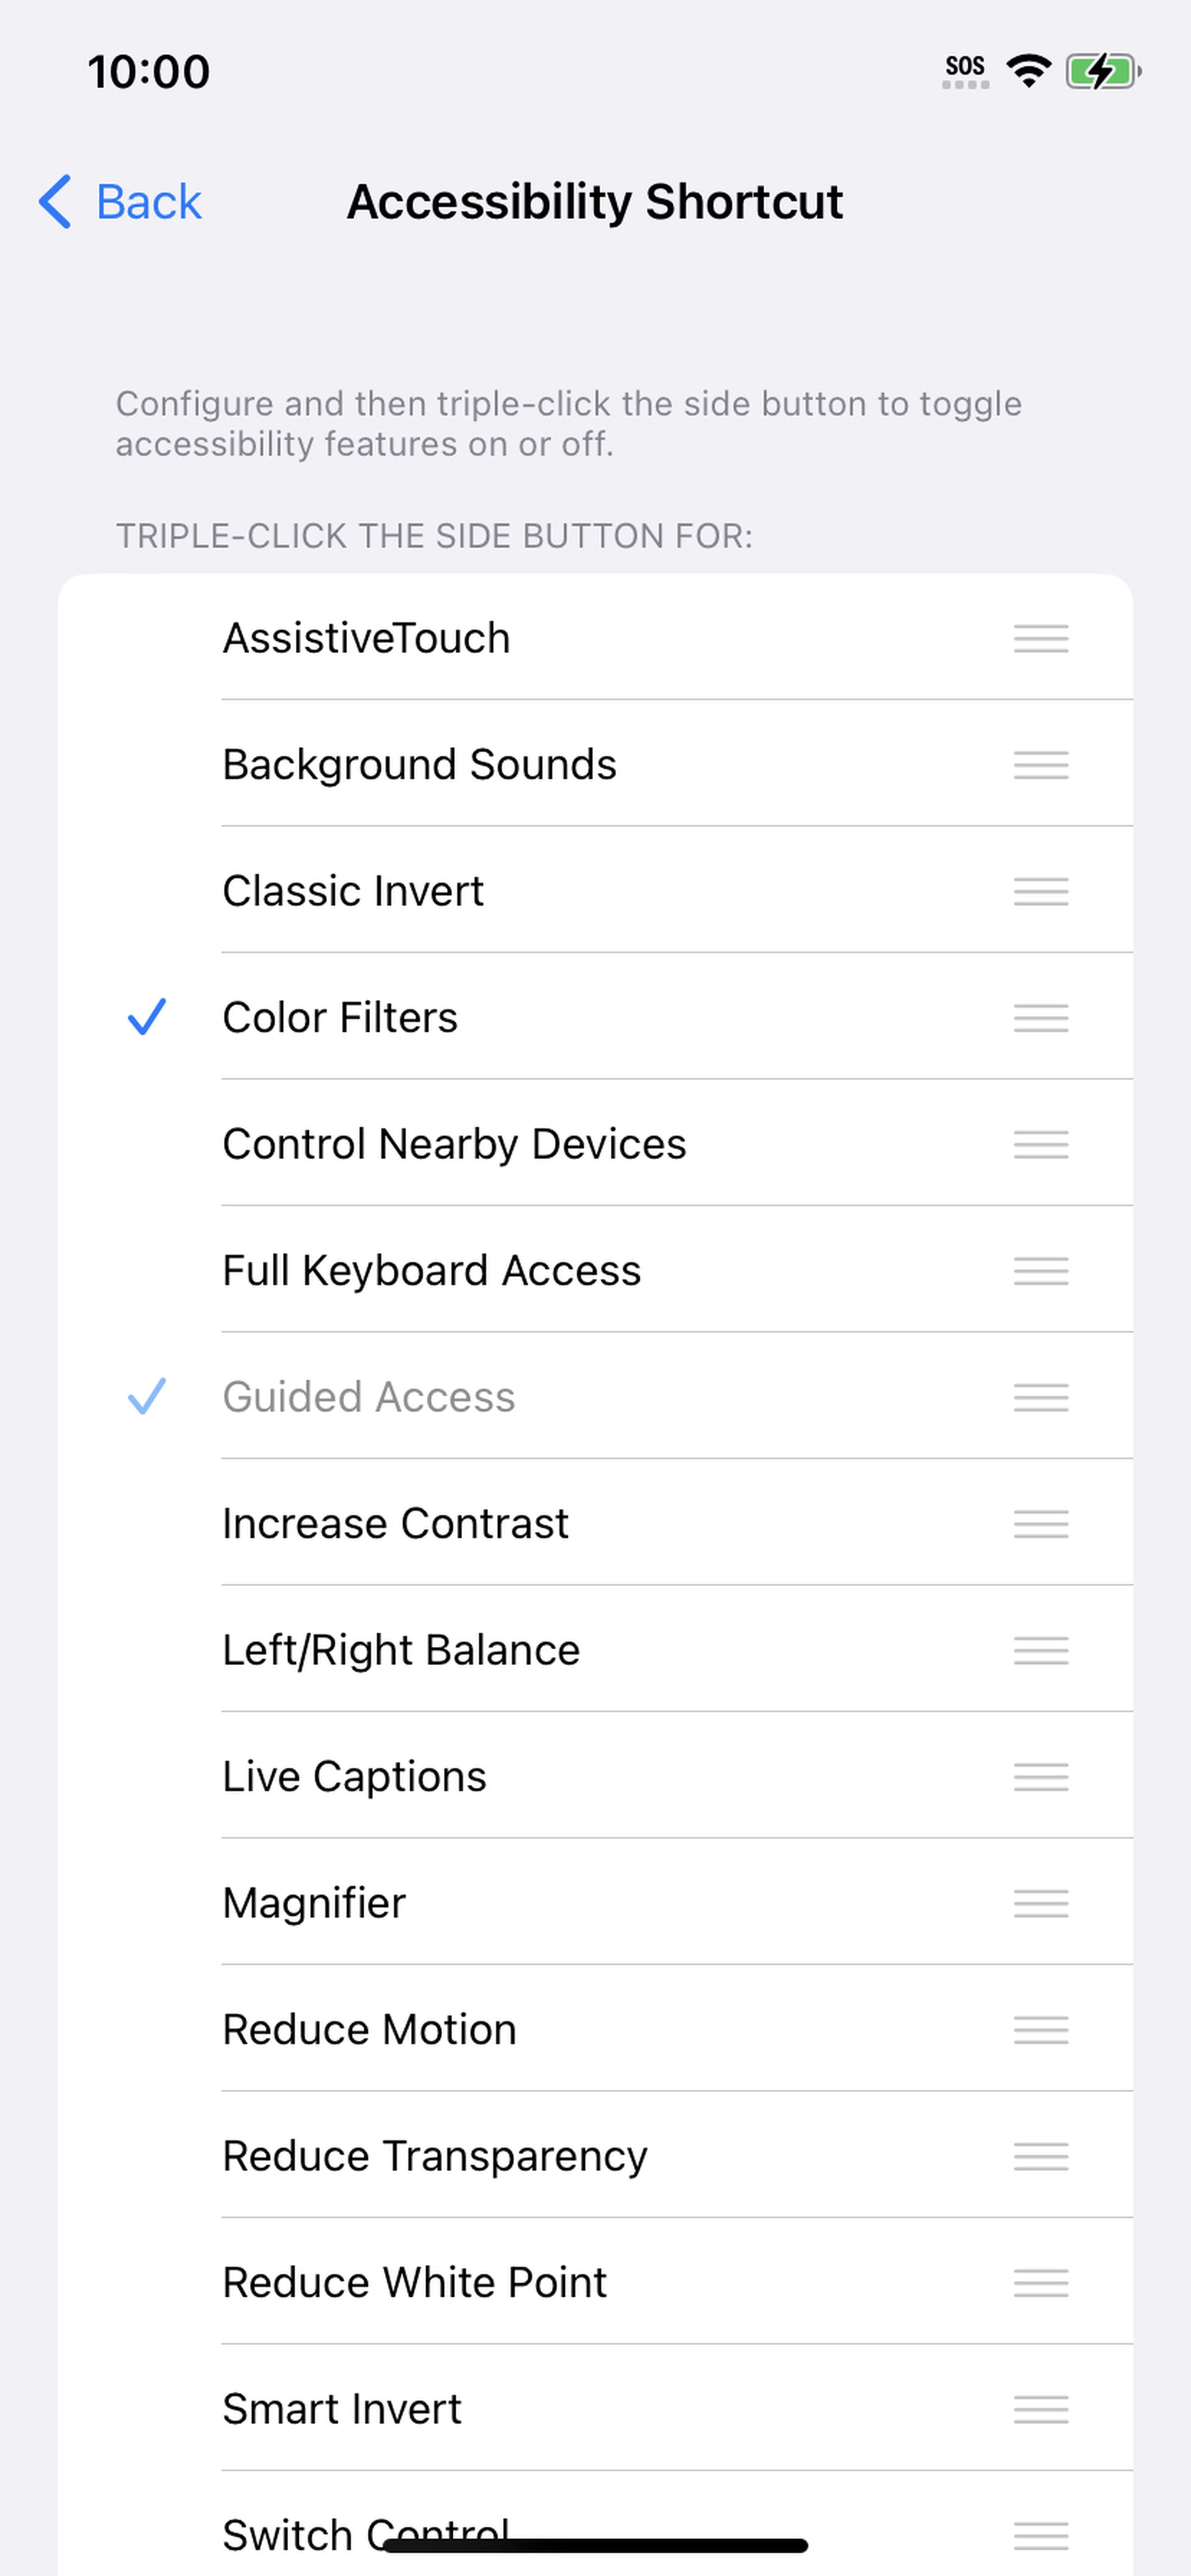 Accessibility Shortcut page with a list of options and a green check next to Color Filters.